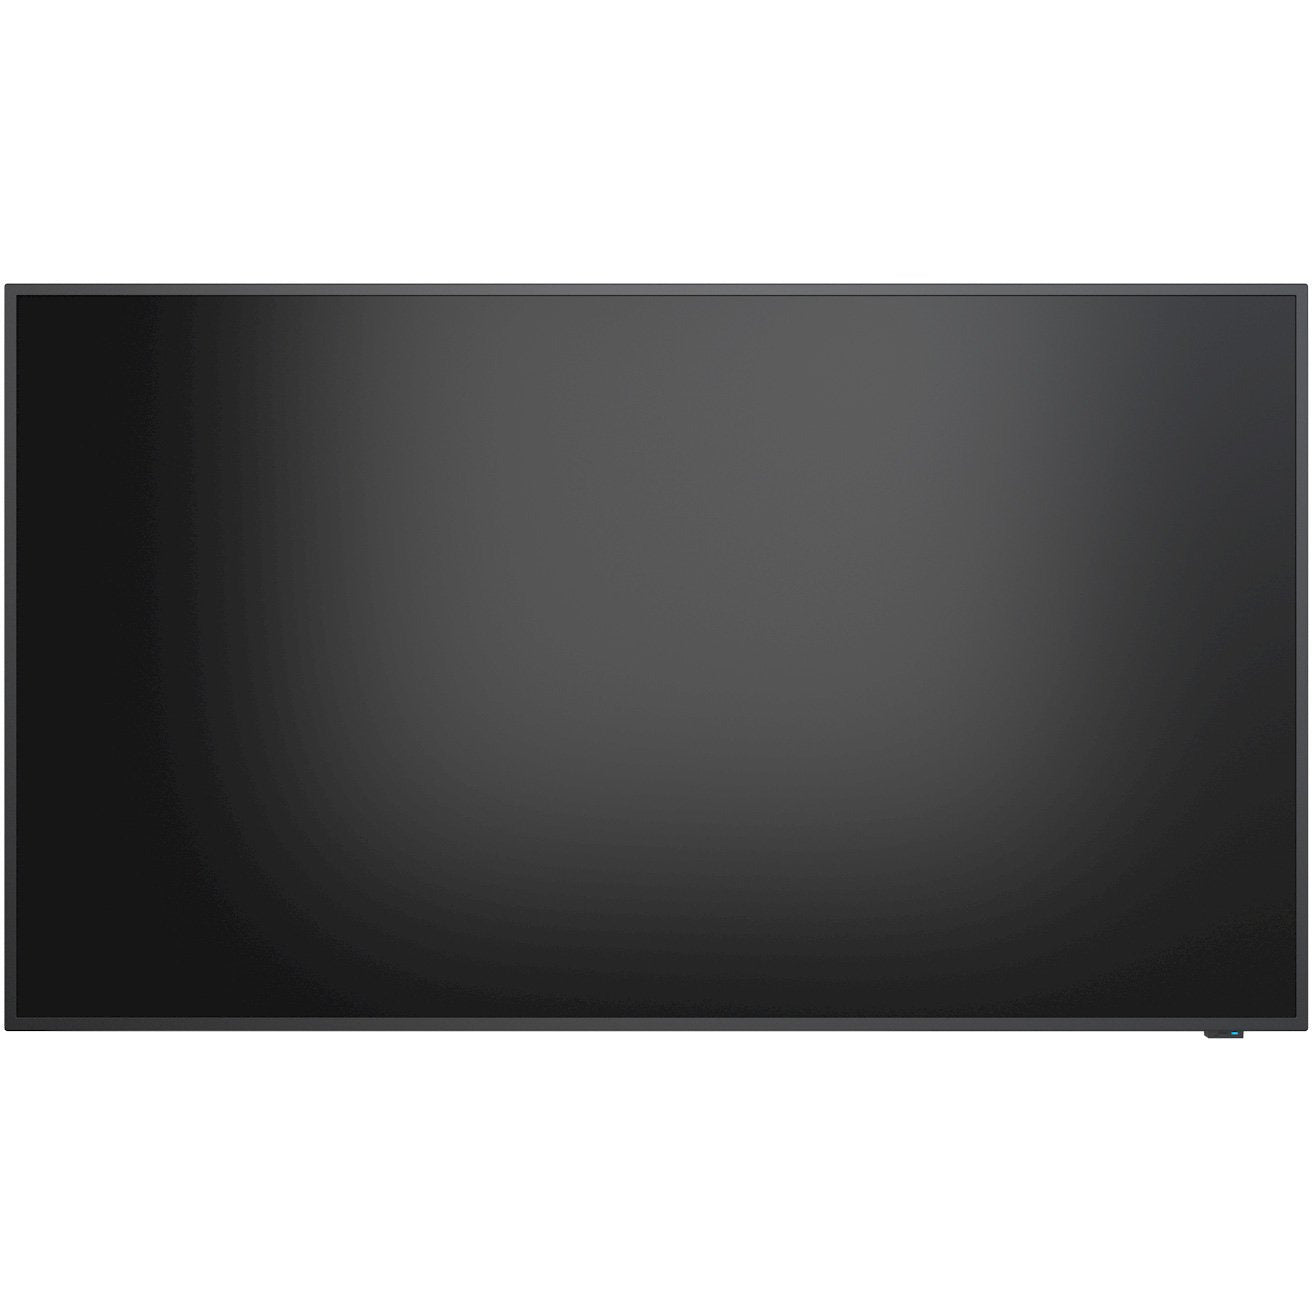 NEC MultiSync® E658 LCD 65" Essential Large Format Display